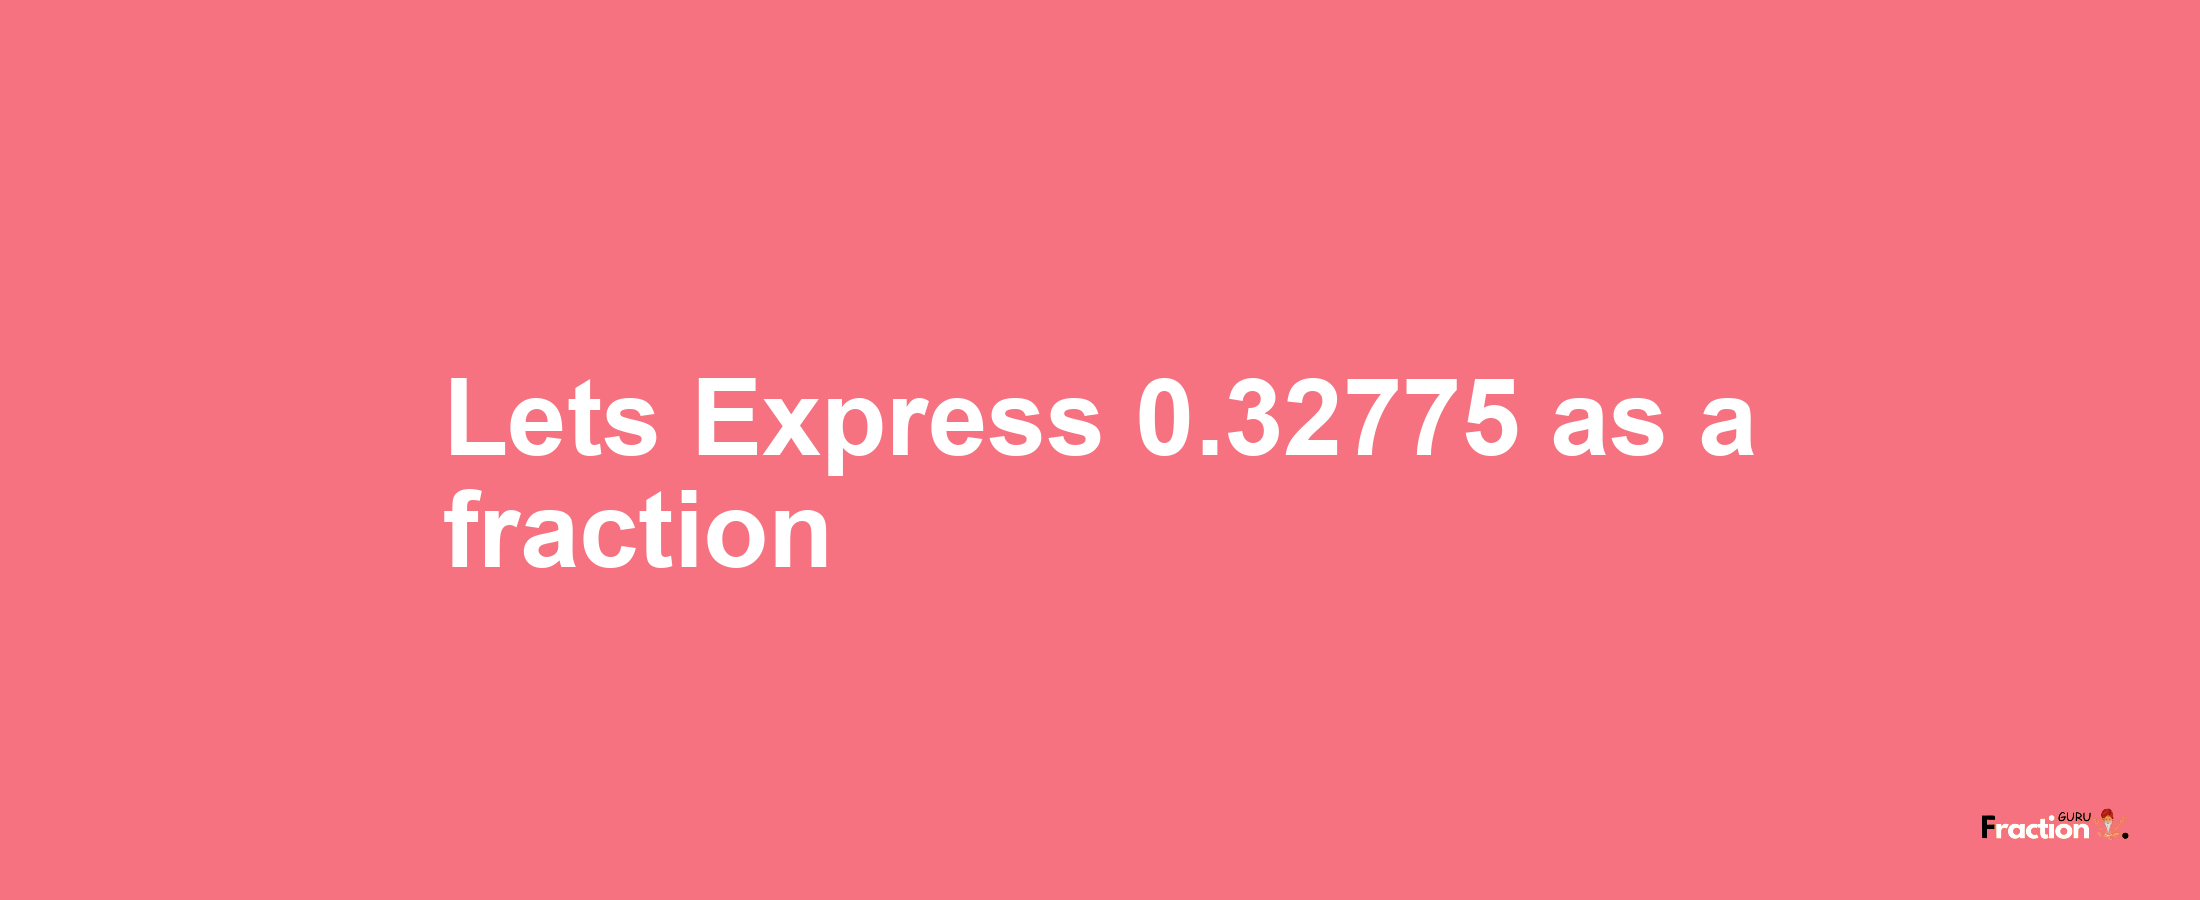 Lets Express 0.32775 as afraction